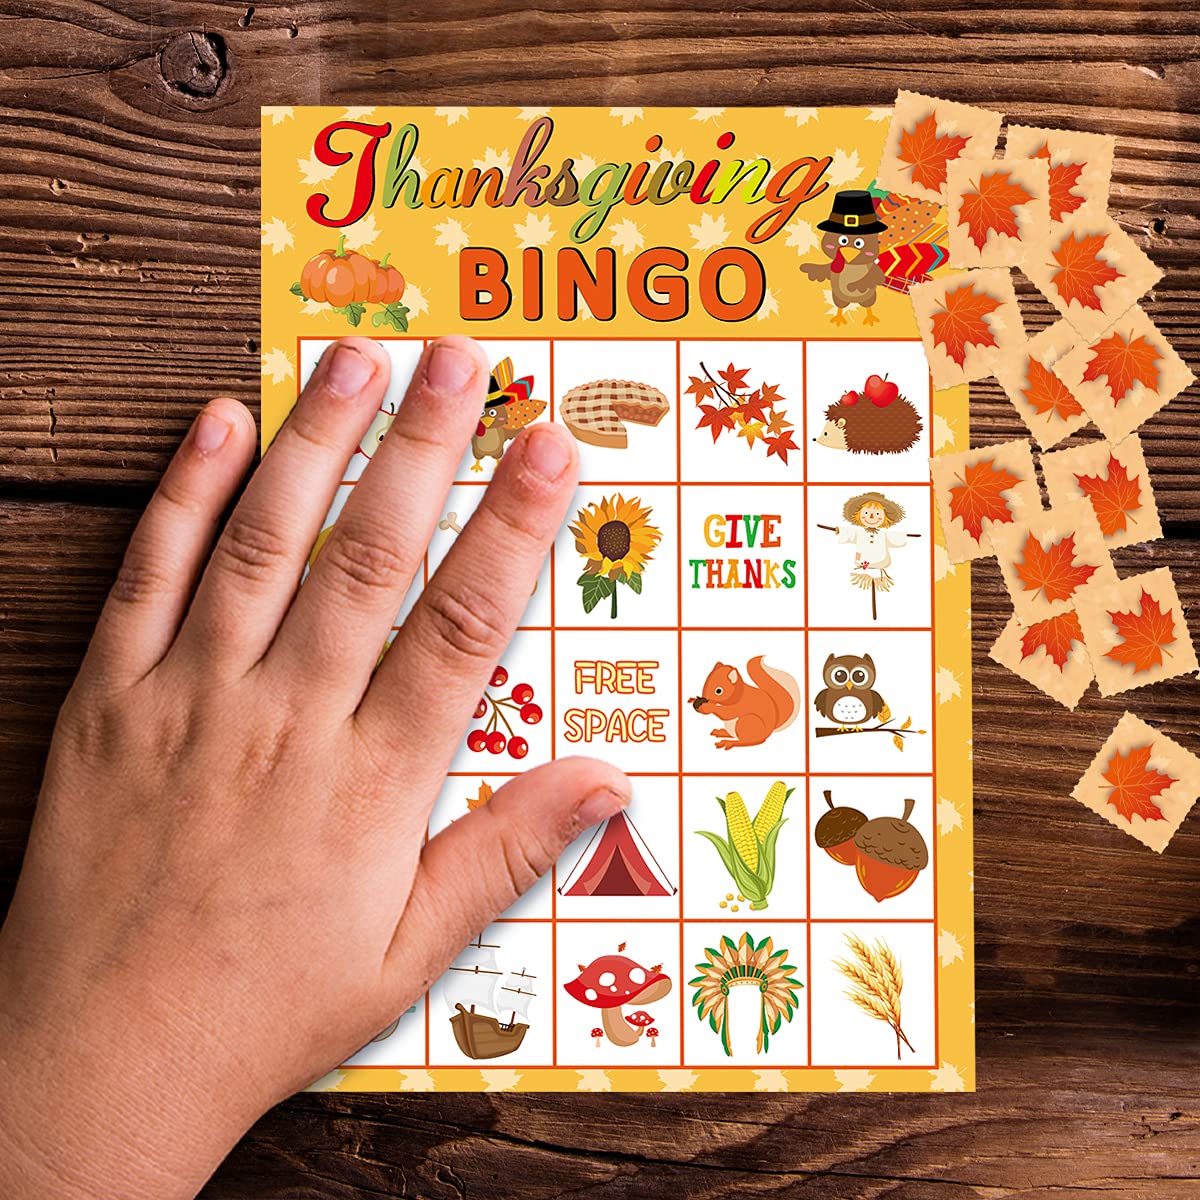 Fancy Land Thanksgiving Bingo Game 24 Players for Kids Holiday Party Craft Supplies